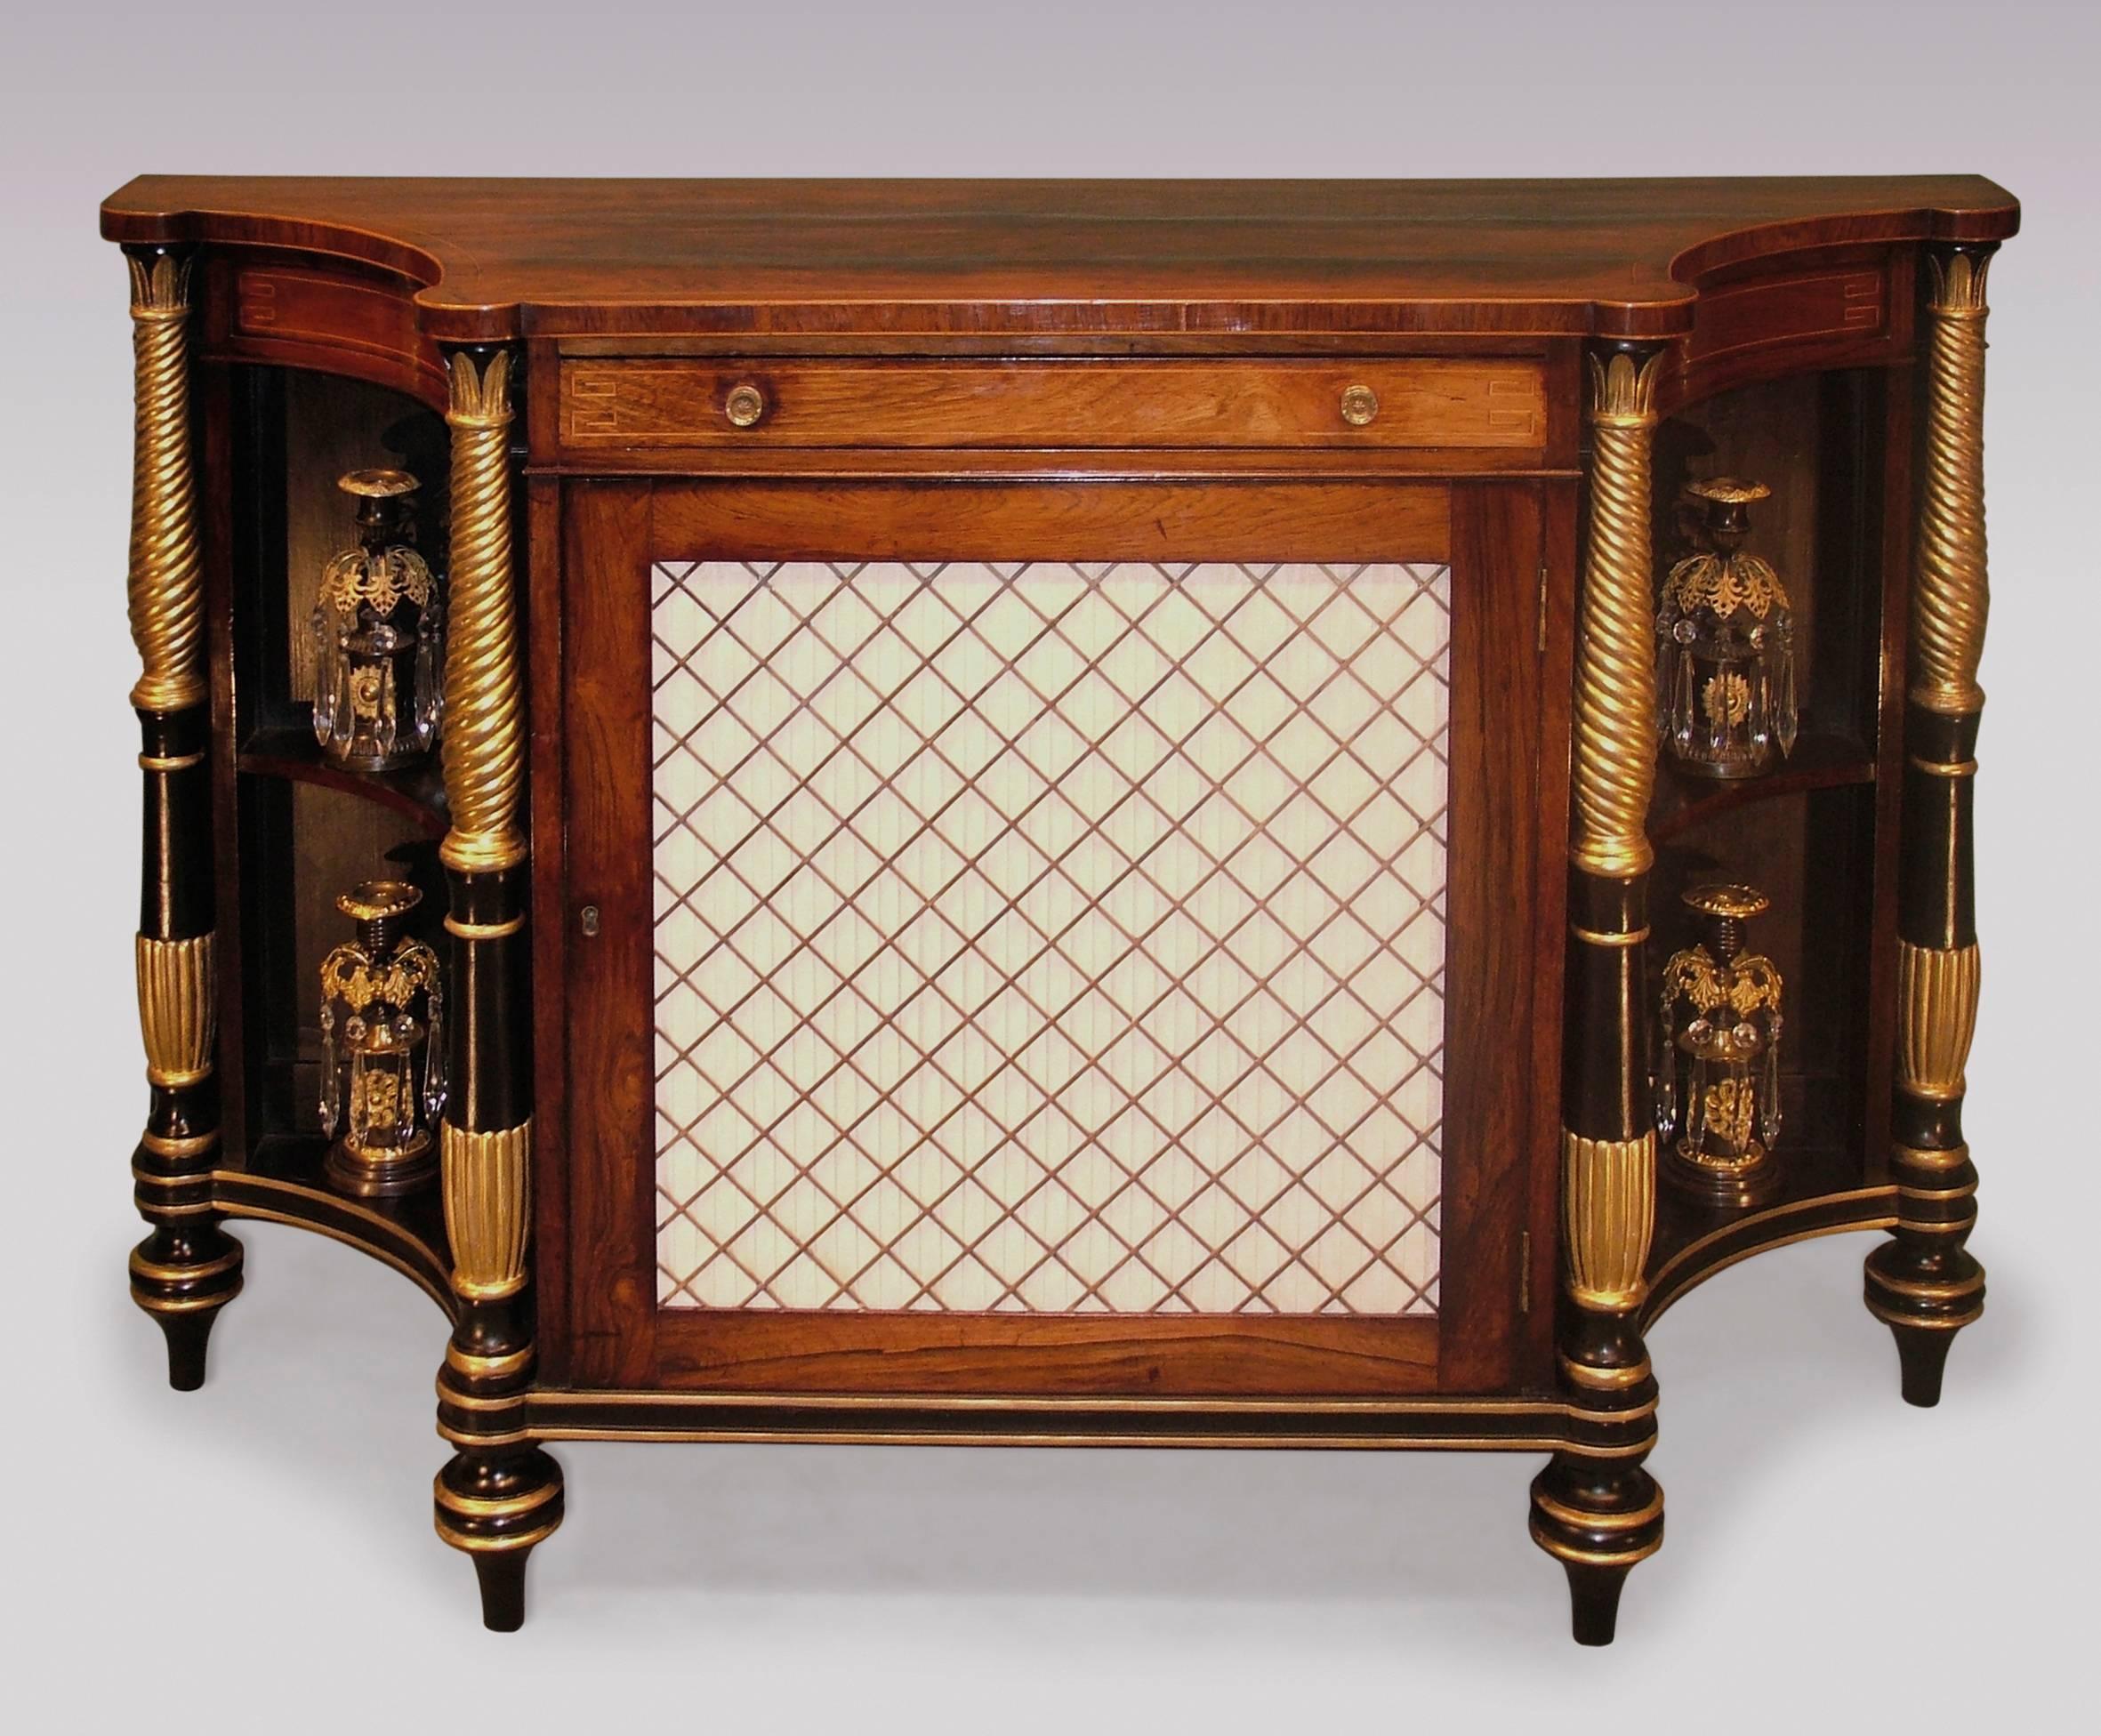 An attractive early 19th century Regency period rosewood Chiffonier, boxwood strung throughout, having concave top with rounded corners, above frieze drawer and central silk pleated brass grille door, flanked by carved giltwood and black painted